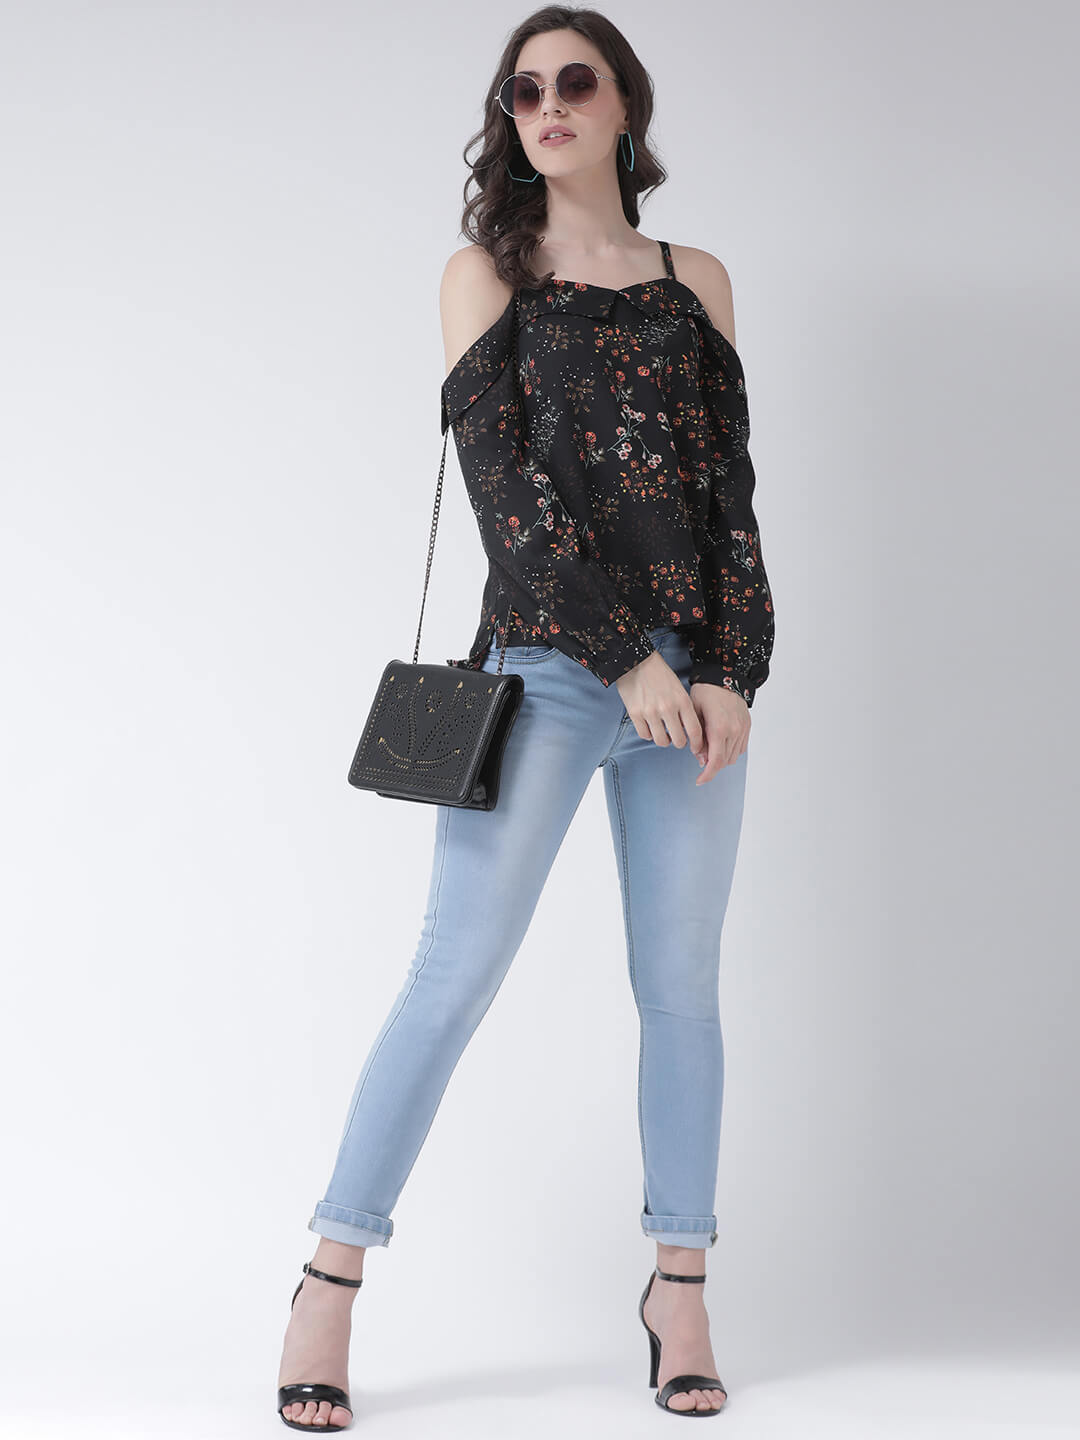 Women'S Floral Printed Woven Top, Has Shoulder Straps, Long Sleeves